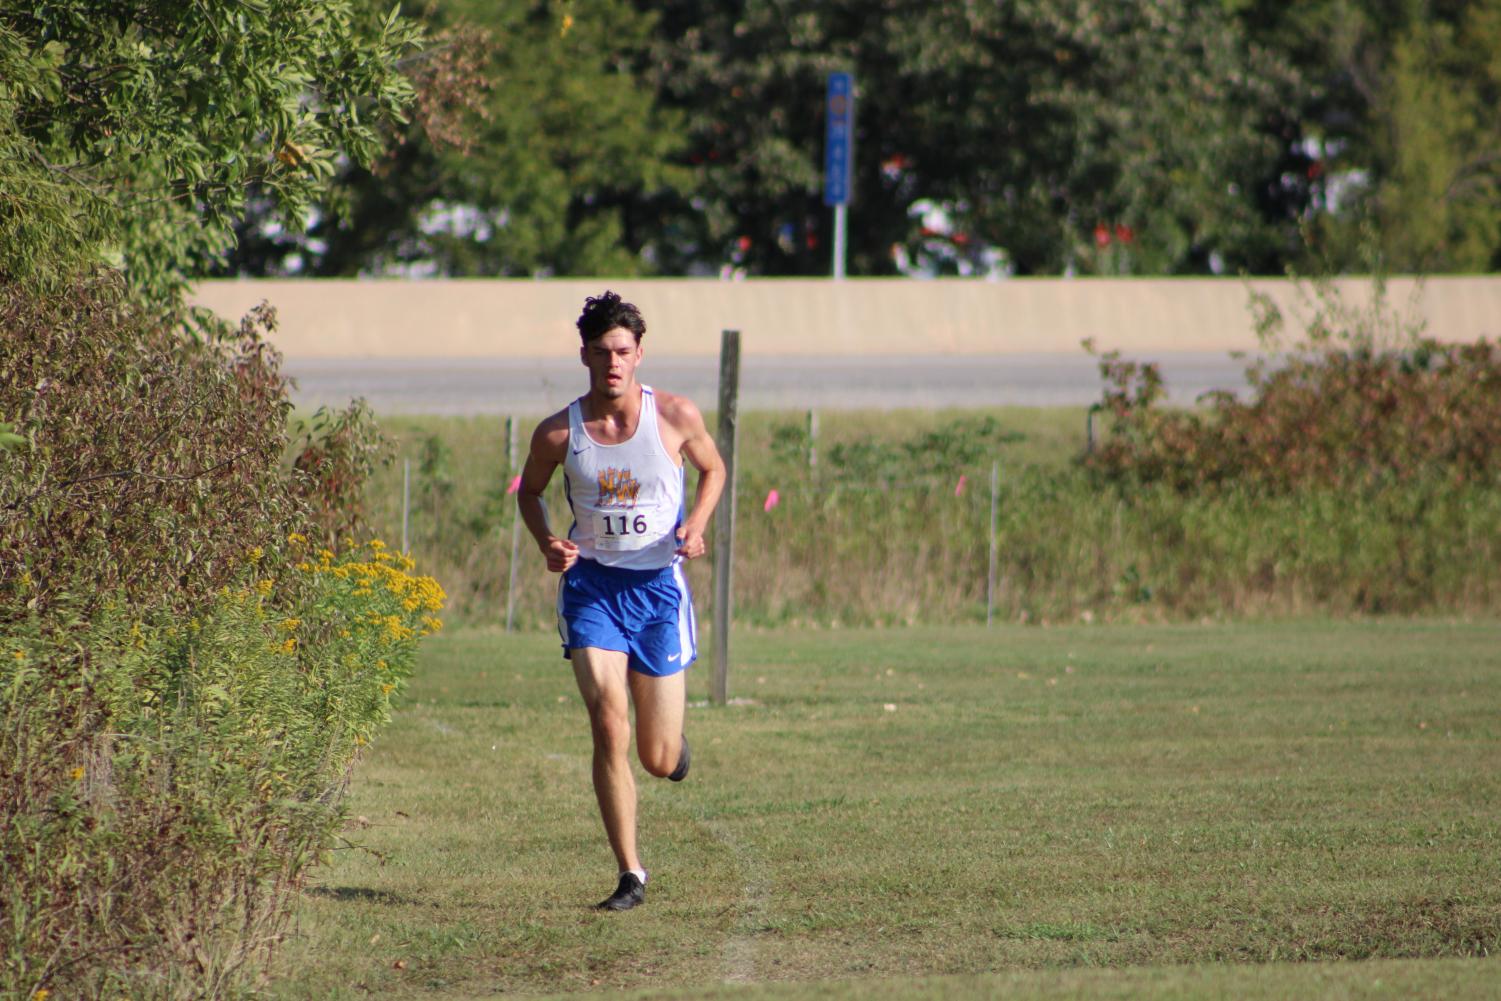 Senior Brayden Rohr takes a commanding lead in the race. His 5k time was 16:59:20.